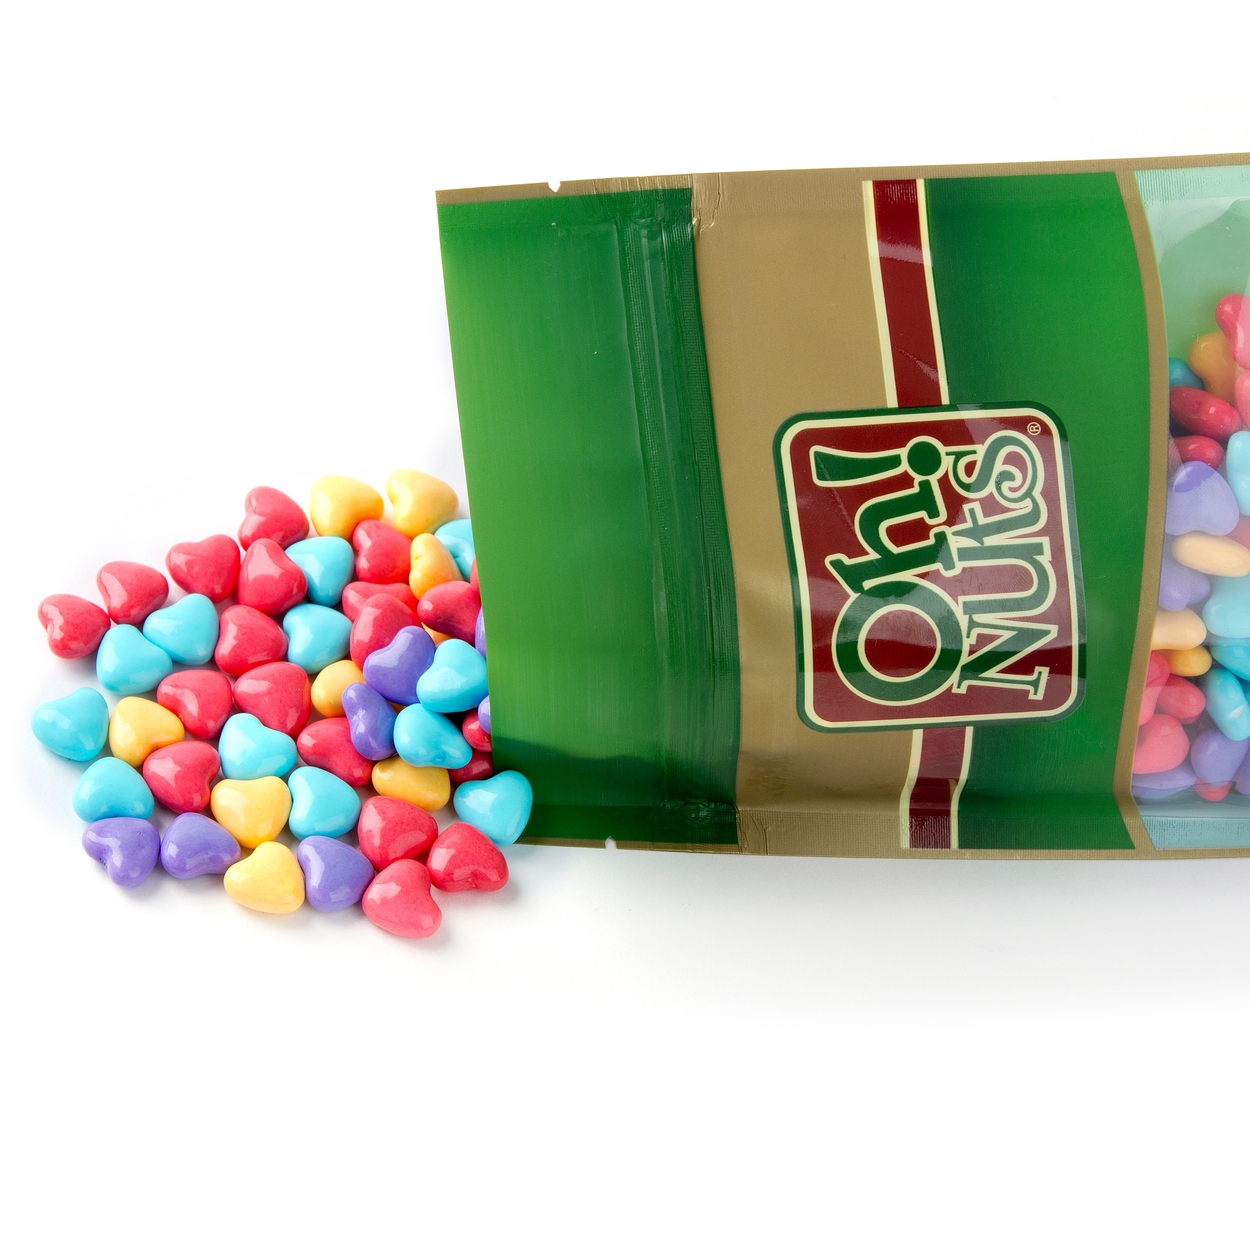 Pastel Heart Candy • Unwrapped Candy • Bulk Candy • Oh Nuts®